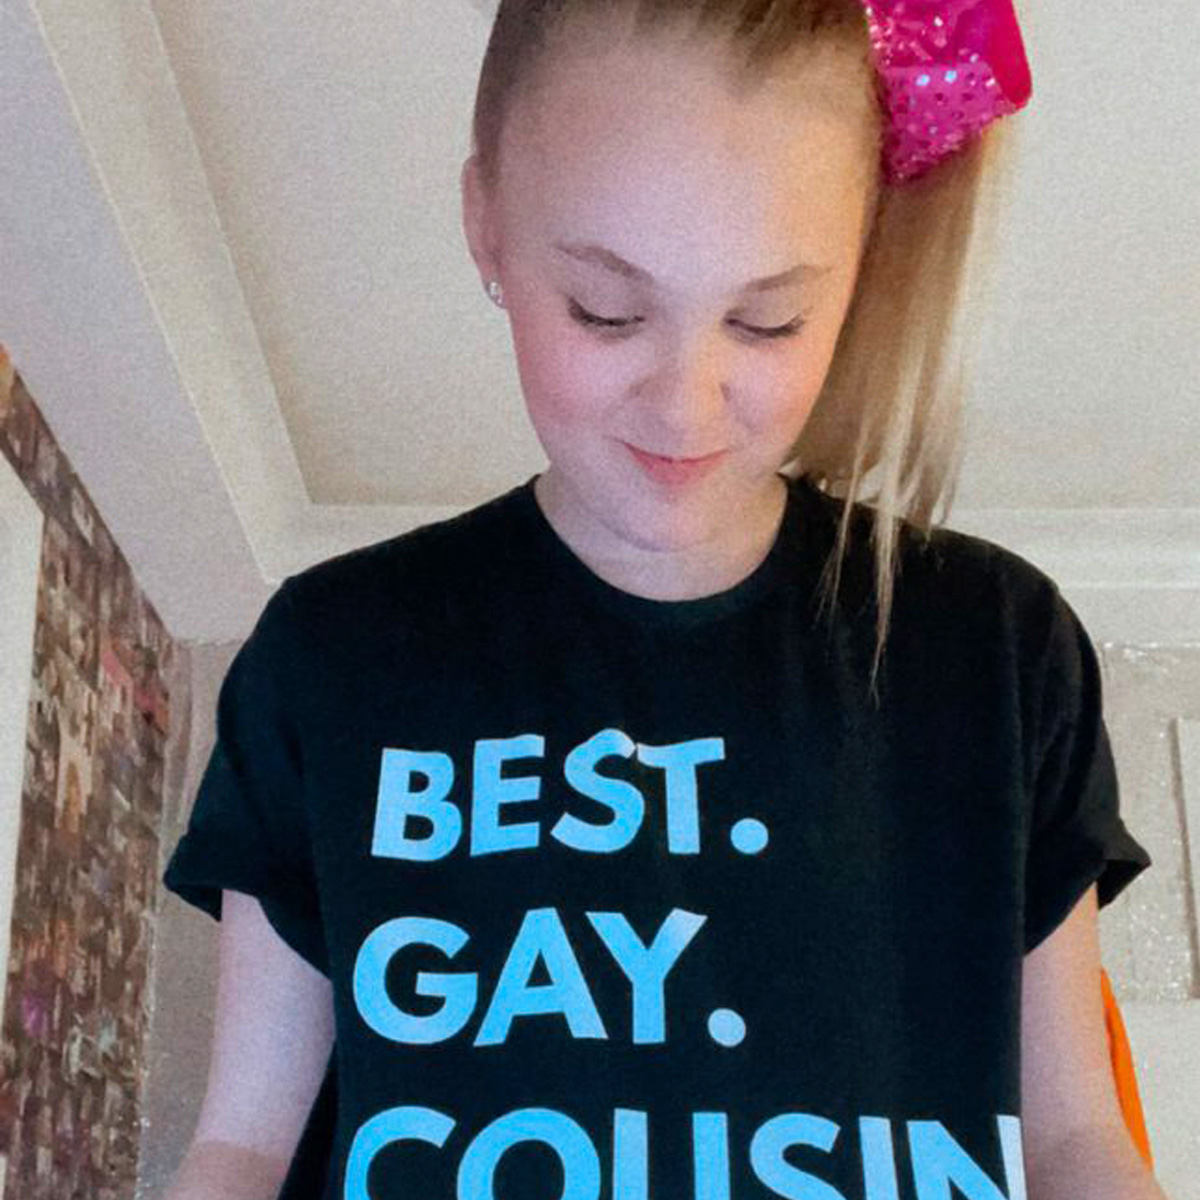 Jojo Siwa apparently comes out wearing a “best gay cousin” t-shirt